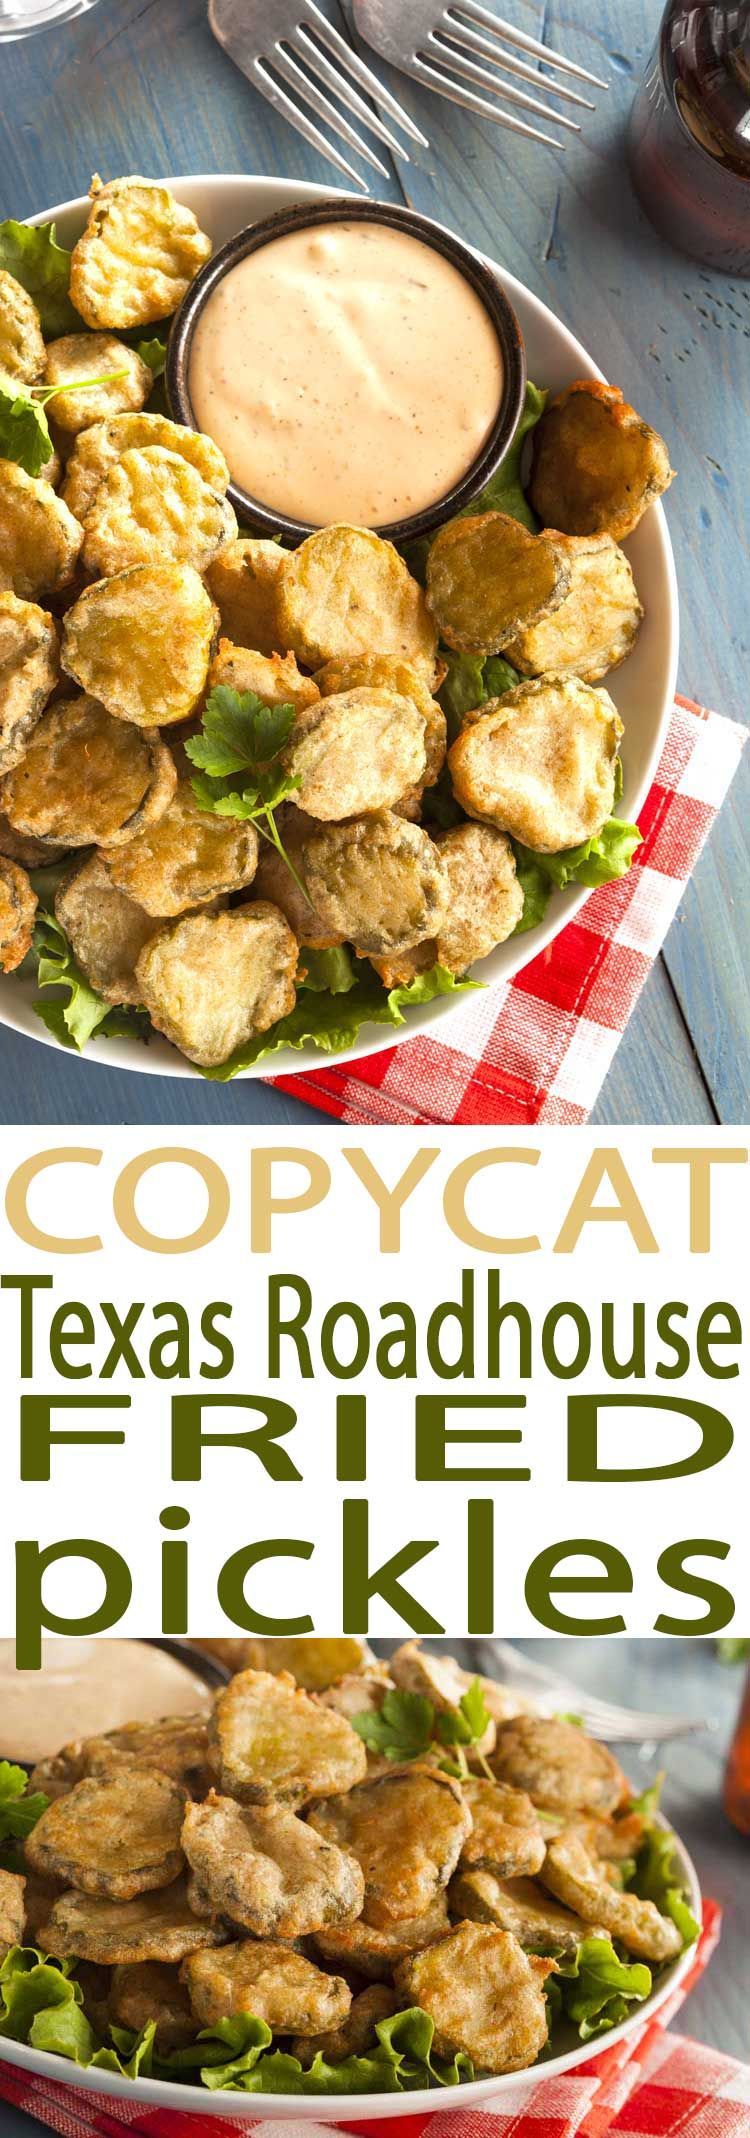 Easy Deep Fried Pickles Recipe is the best appetizer around. Its a copycat Texas Roadhouse Fried Pickles recipe that is amazing.